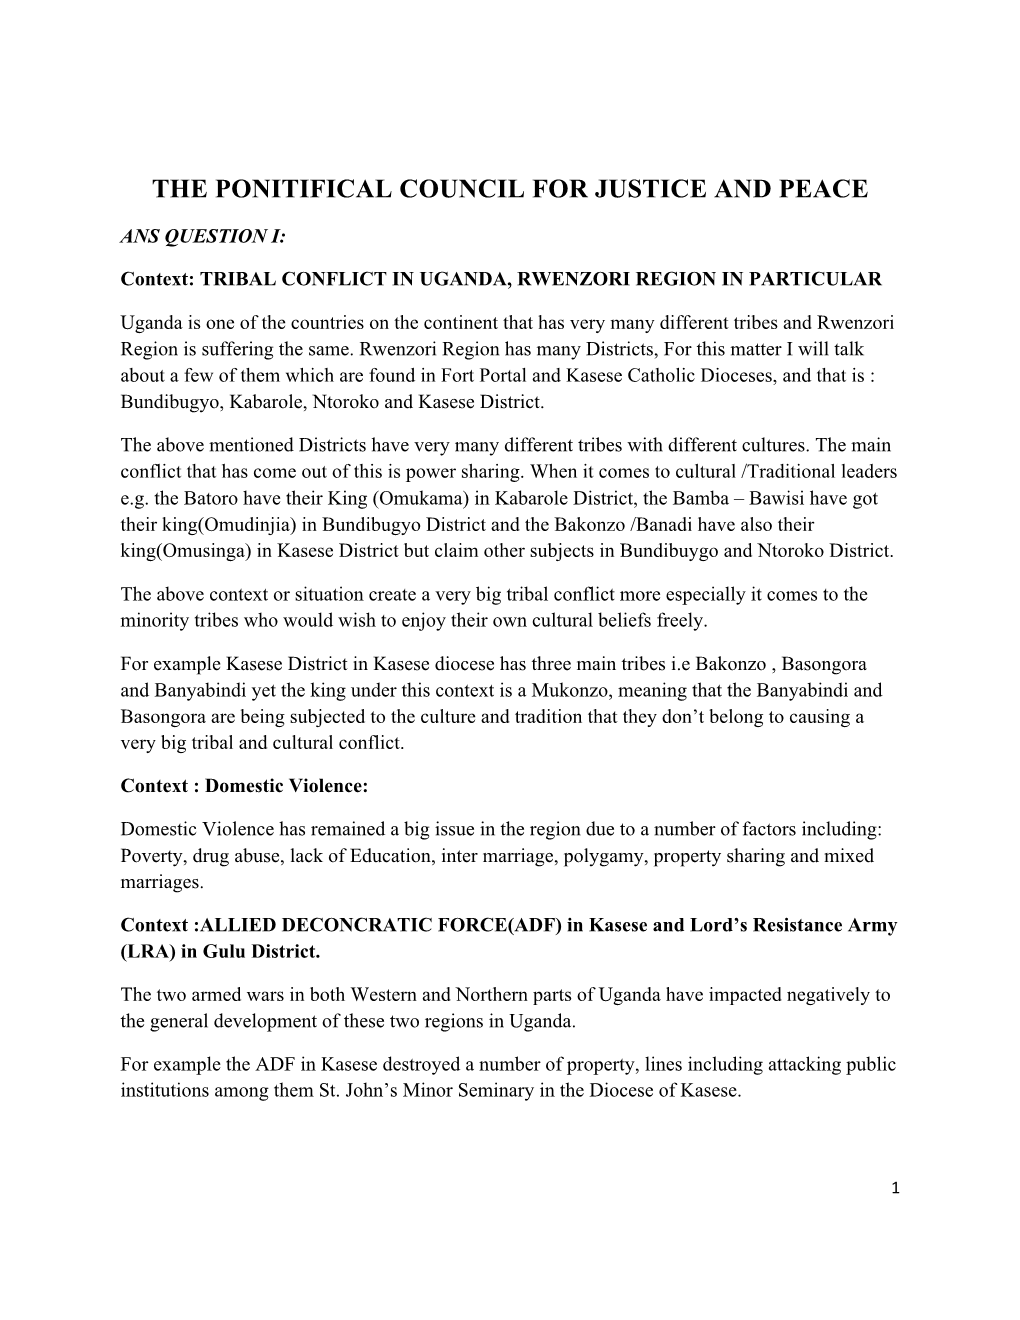 The Ponitifical Council for Justice and Peace